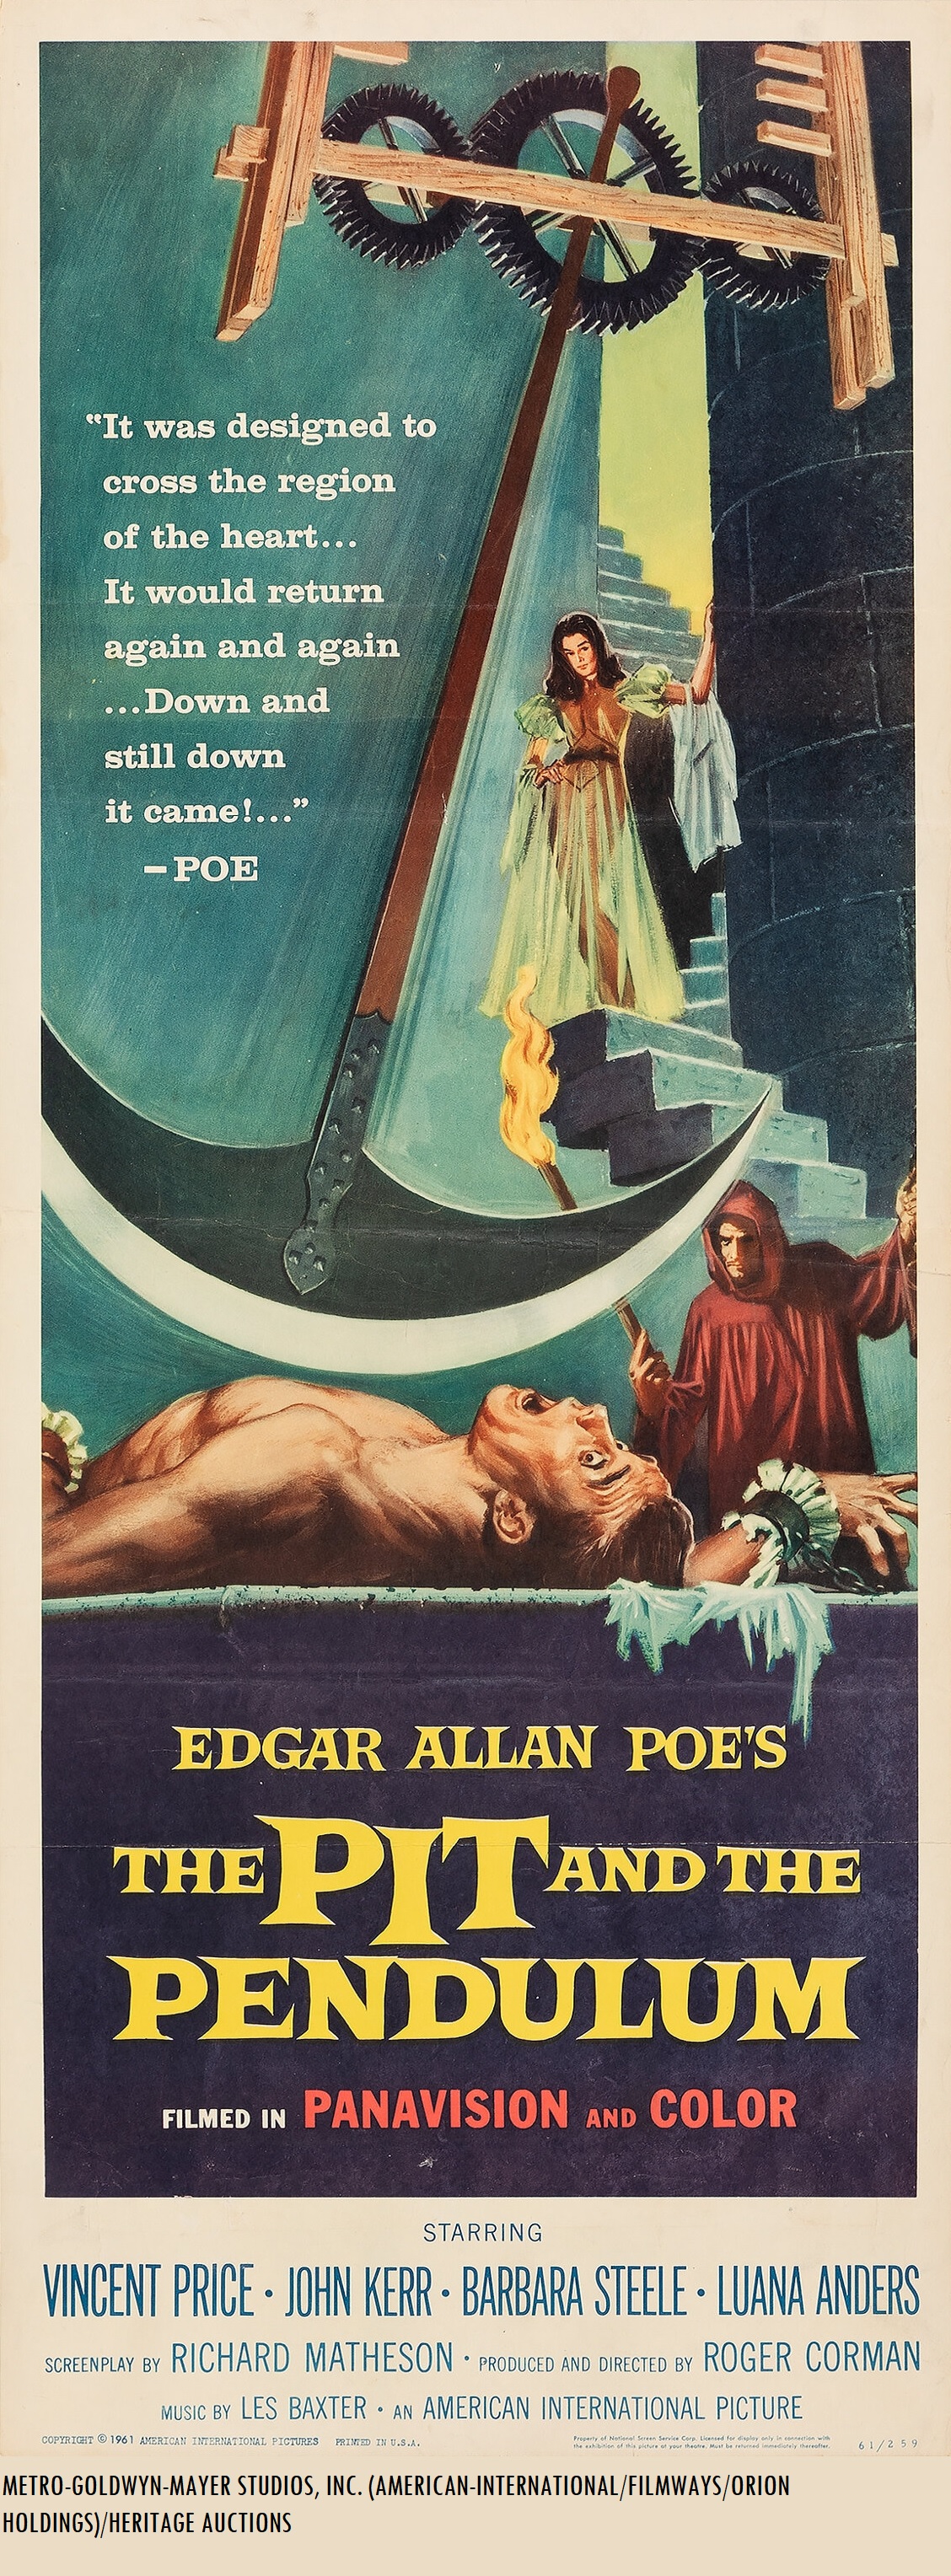 Original_1961_American_International_Theatrical_Poster_Art_The_Pit_And_The_Pendulum_Roger_Corman_Vincent_Price